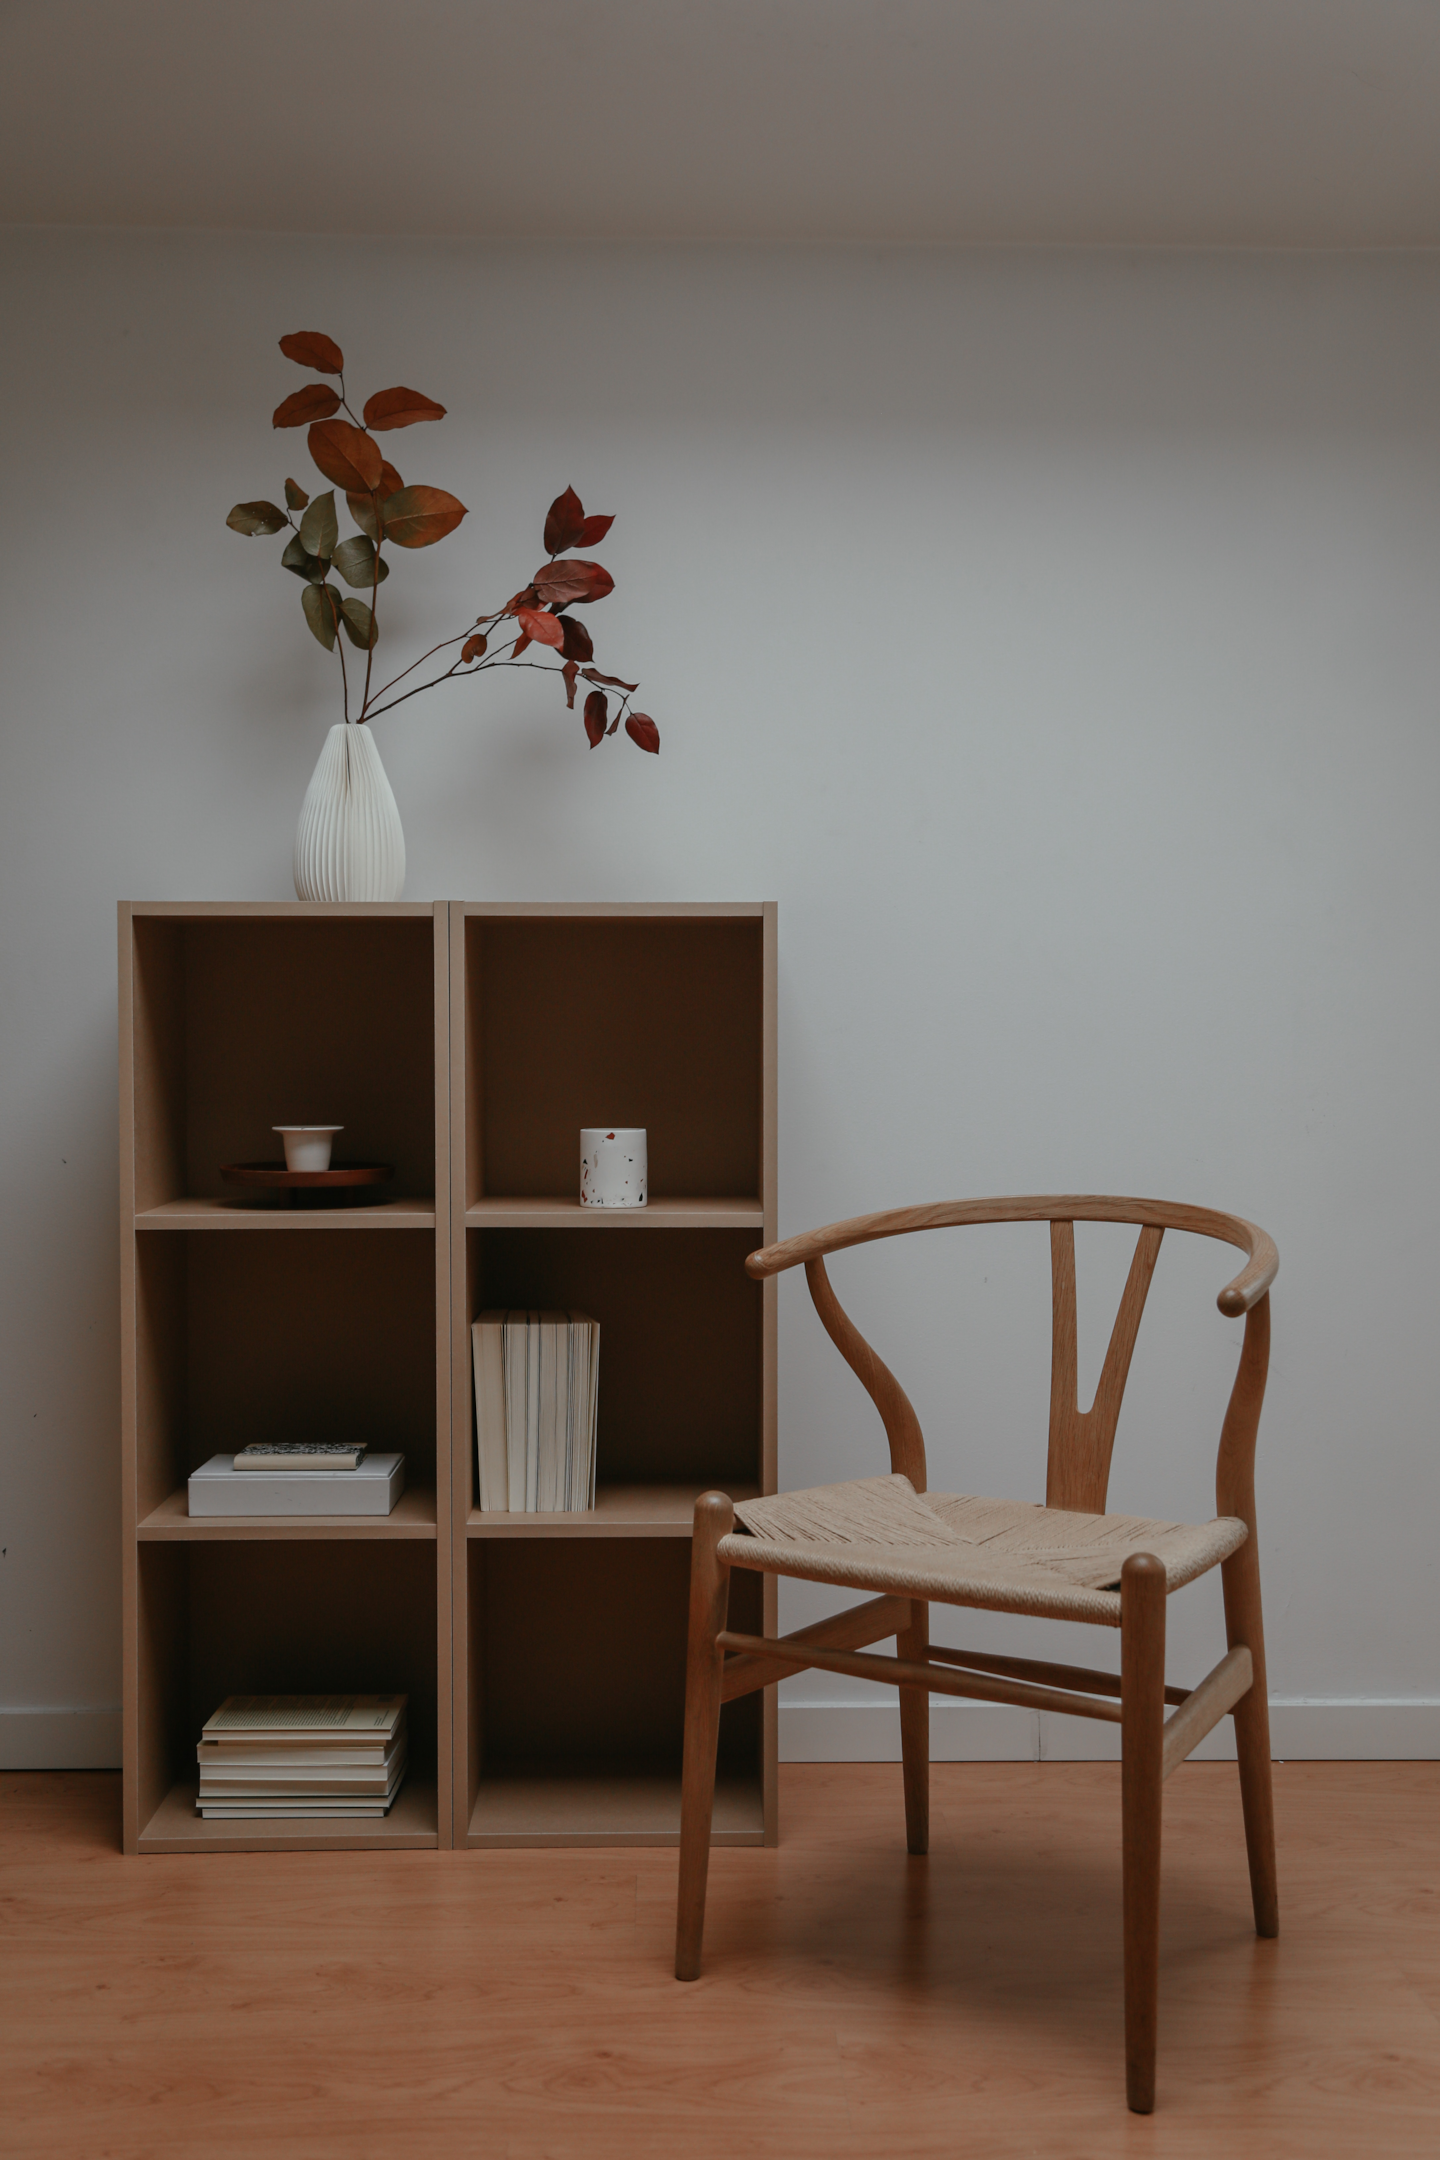 Image credit: https://www.pexels.com/photo/photo-of-a-brown-chair-near-a-plant-on-top-of-a-bookcase-6956499/